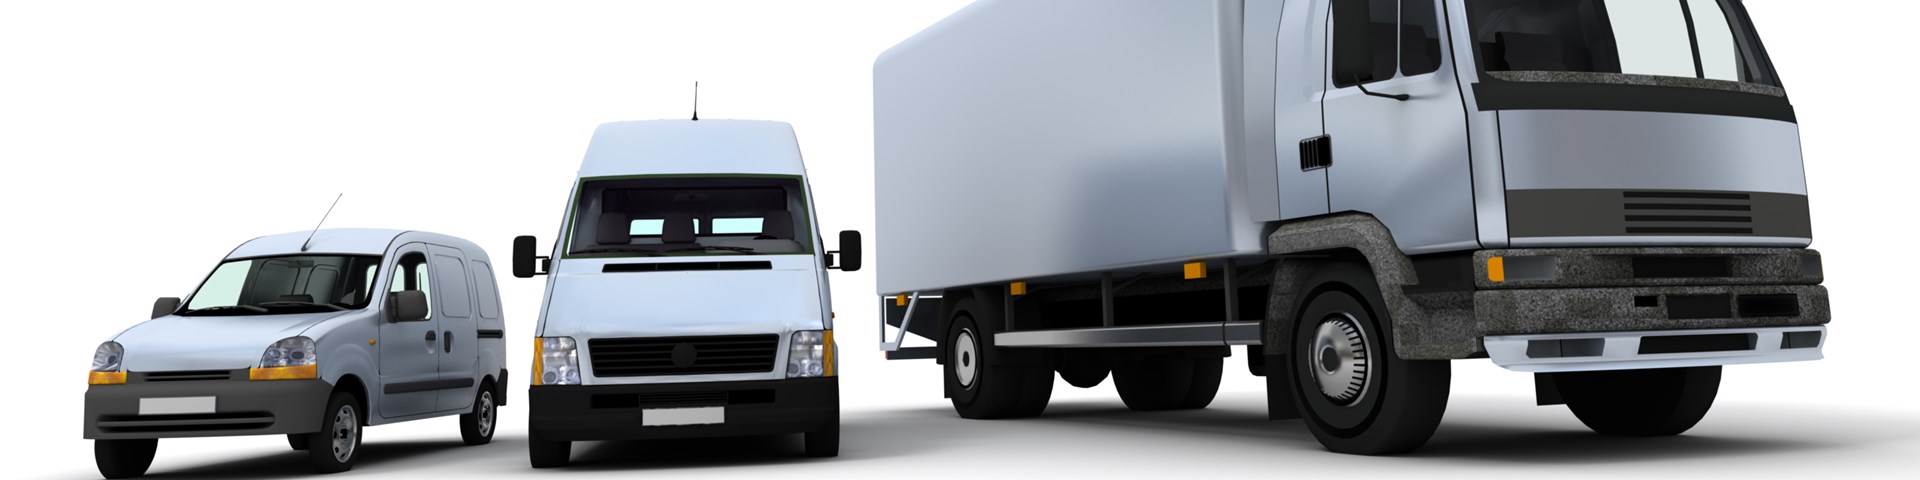 Commercial Vehicle Insurance - Shearwater Insurance 